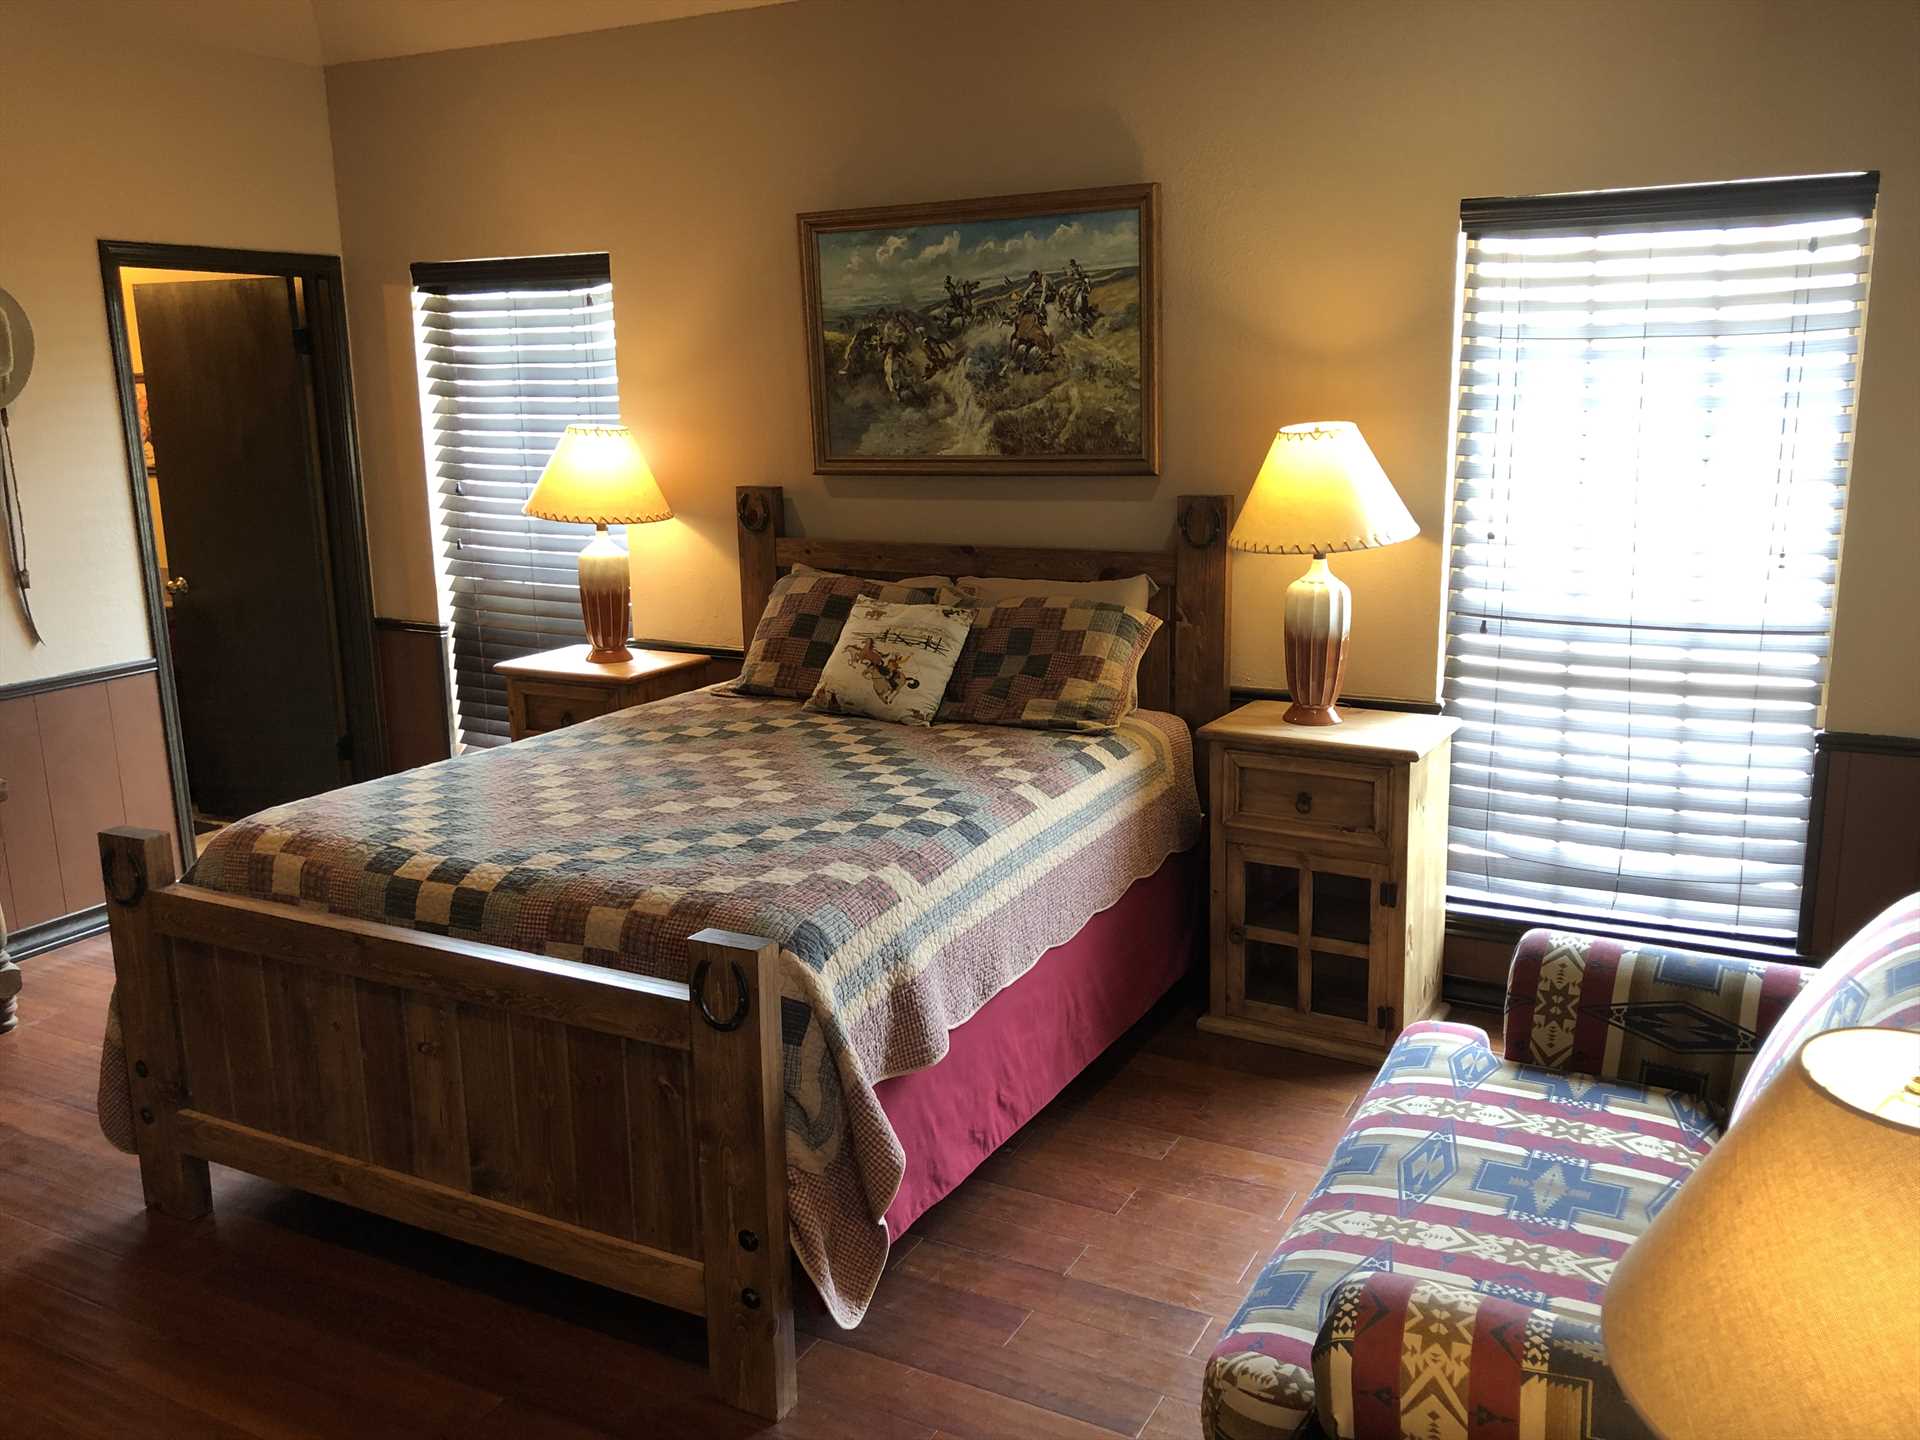                                                 Nighttime comfort on queen and twin beds, with comfy and clean bed and bath linens provided.